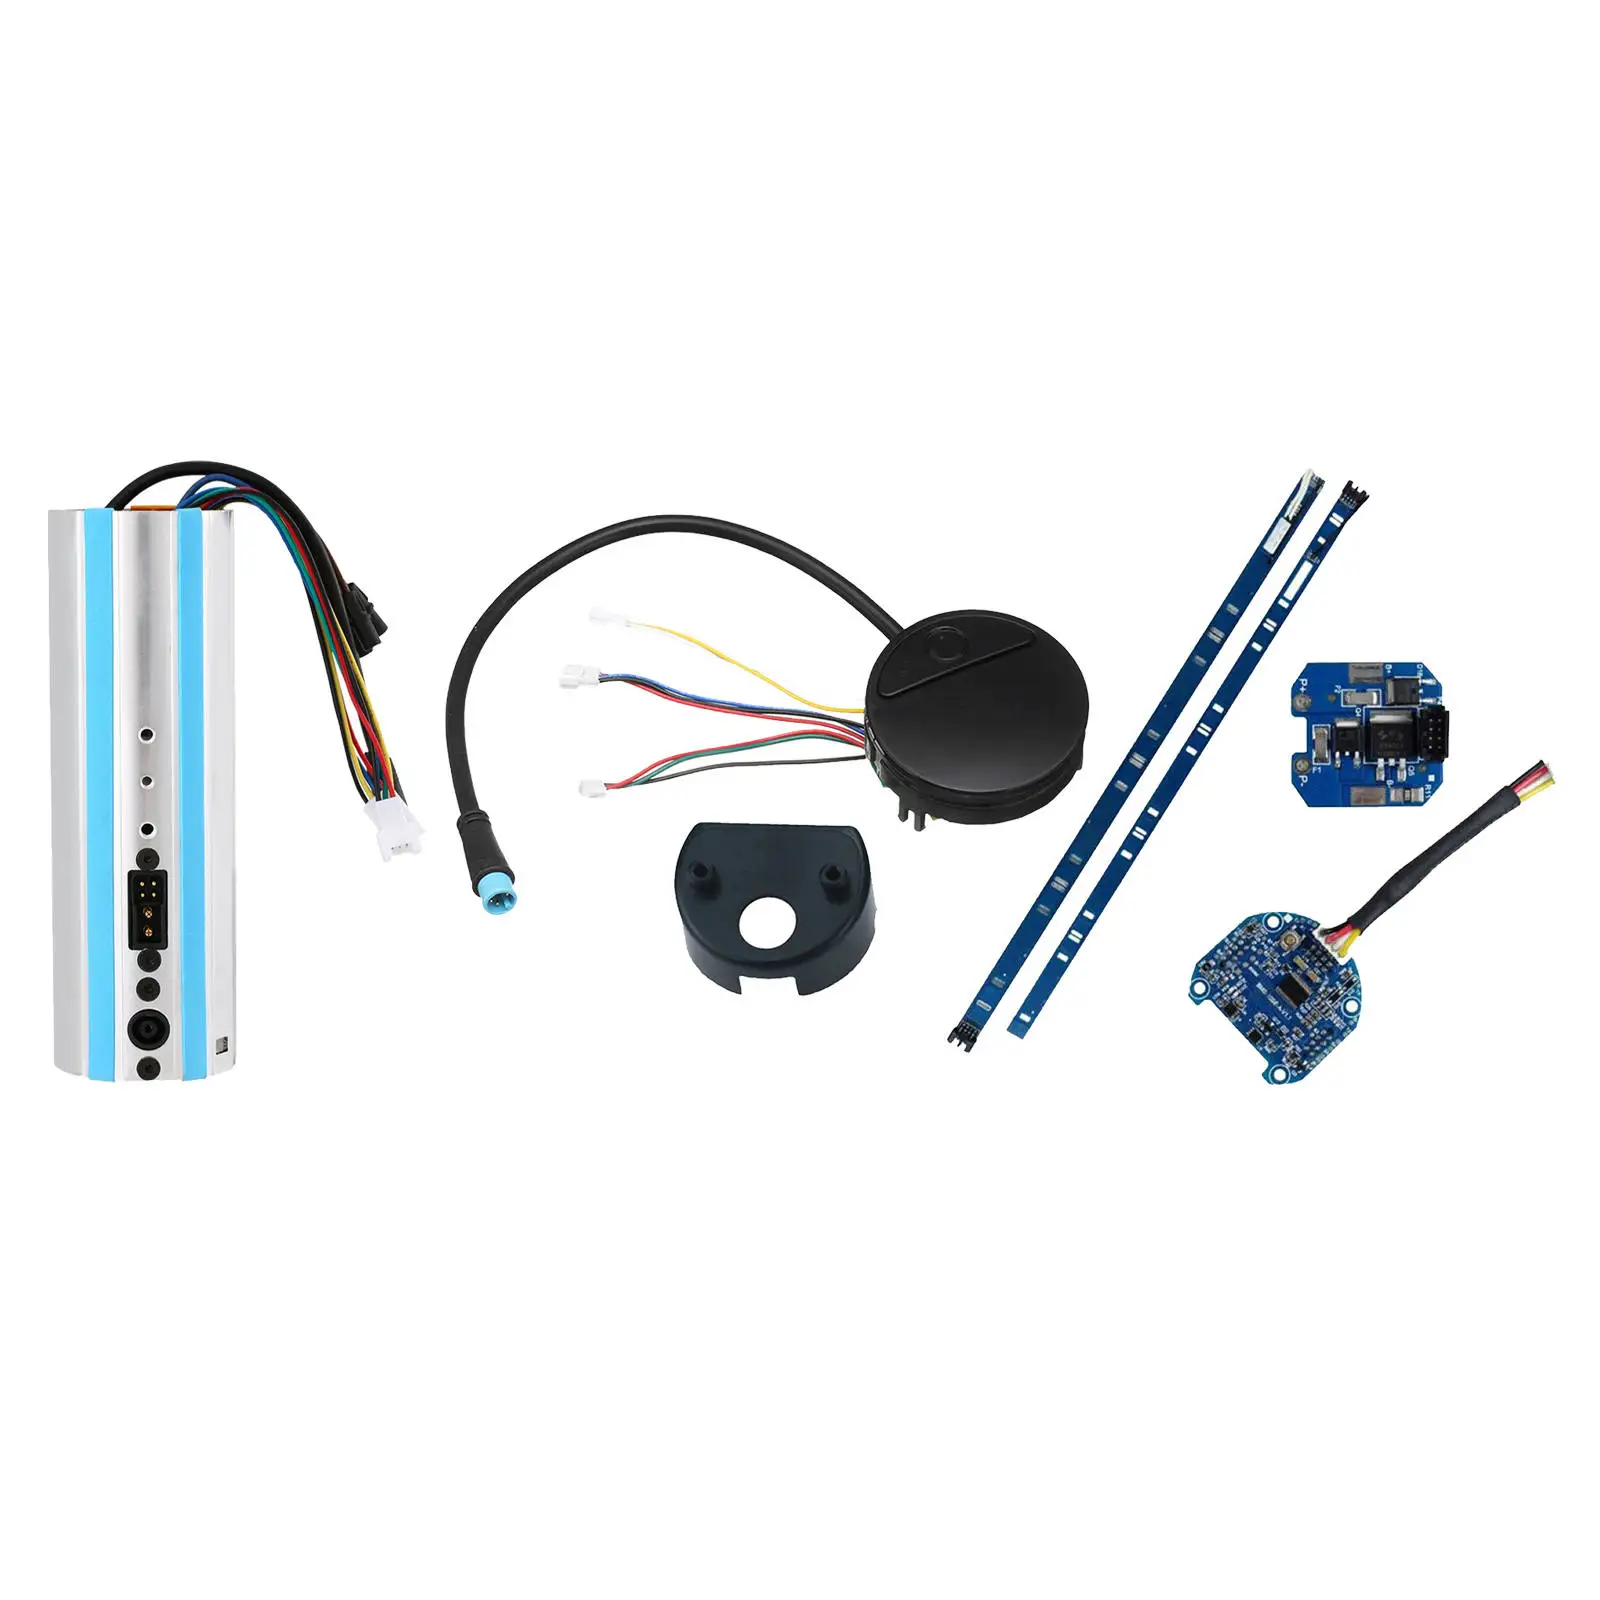 Replacement For Ninebot segways ES1/ES2/ES3/ES4 Electric Scooter Activated Bluetooth Dashboard Control Board Repair Parts